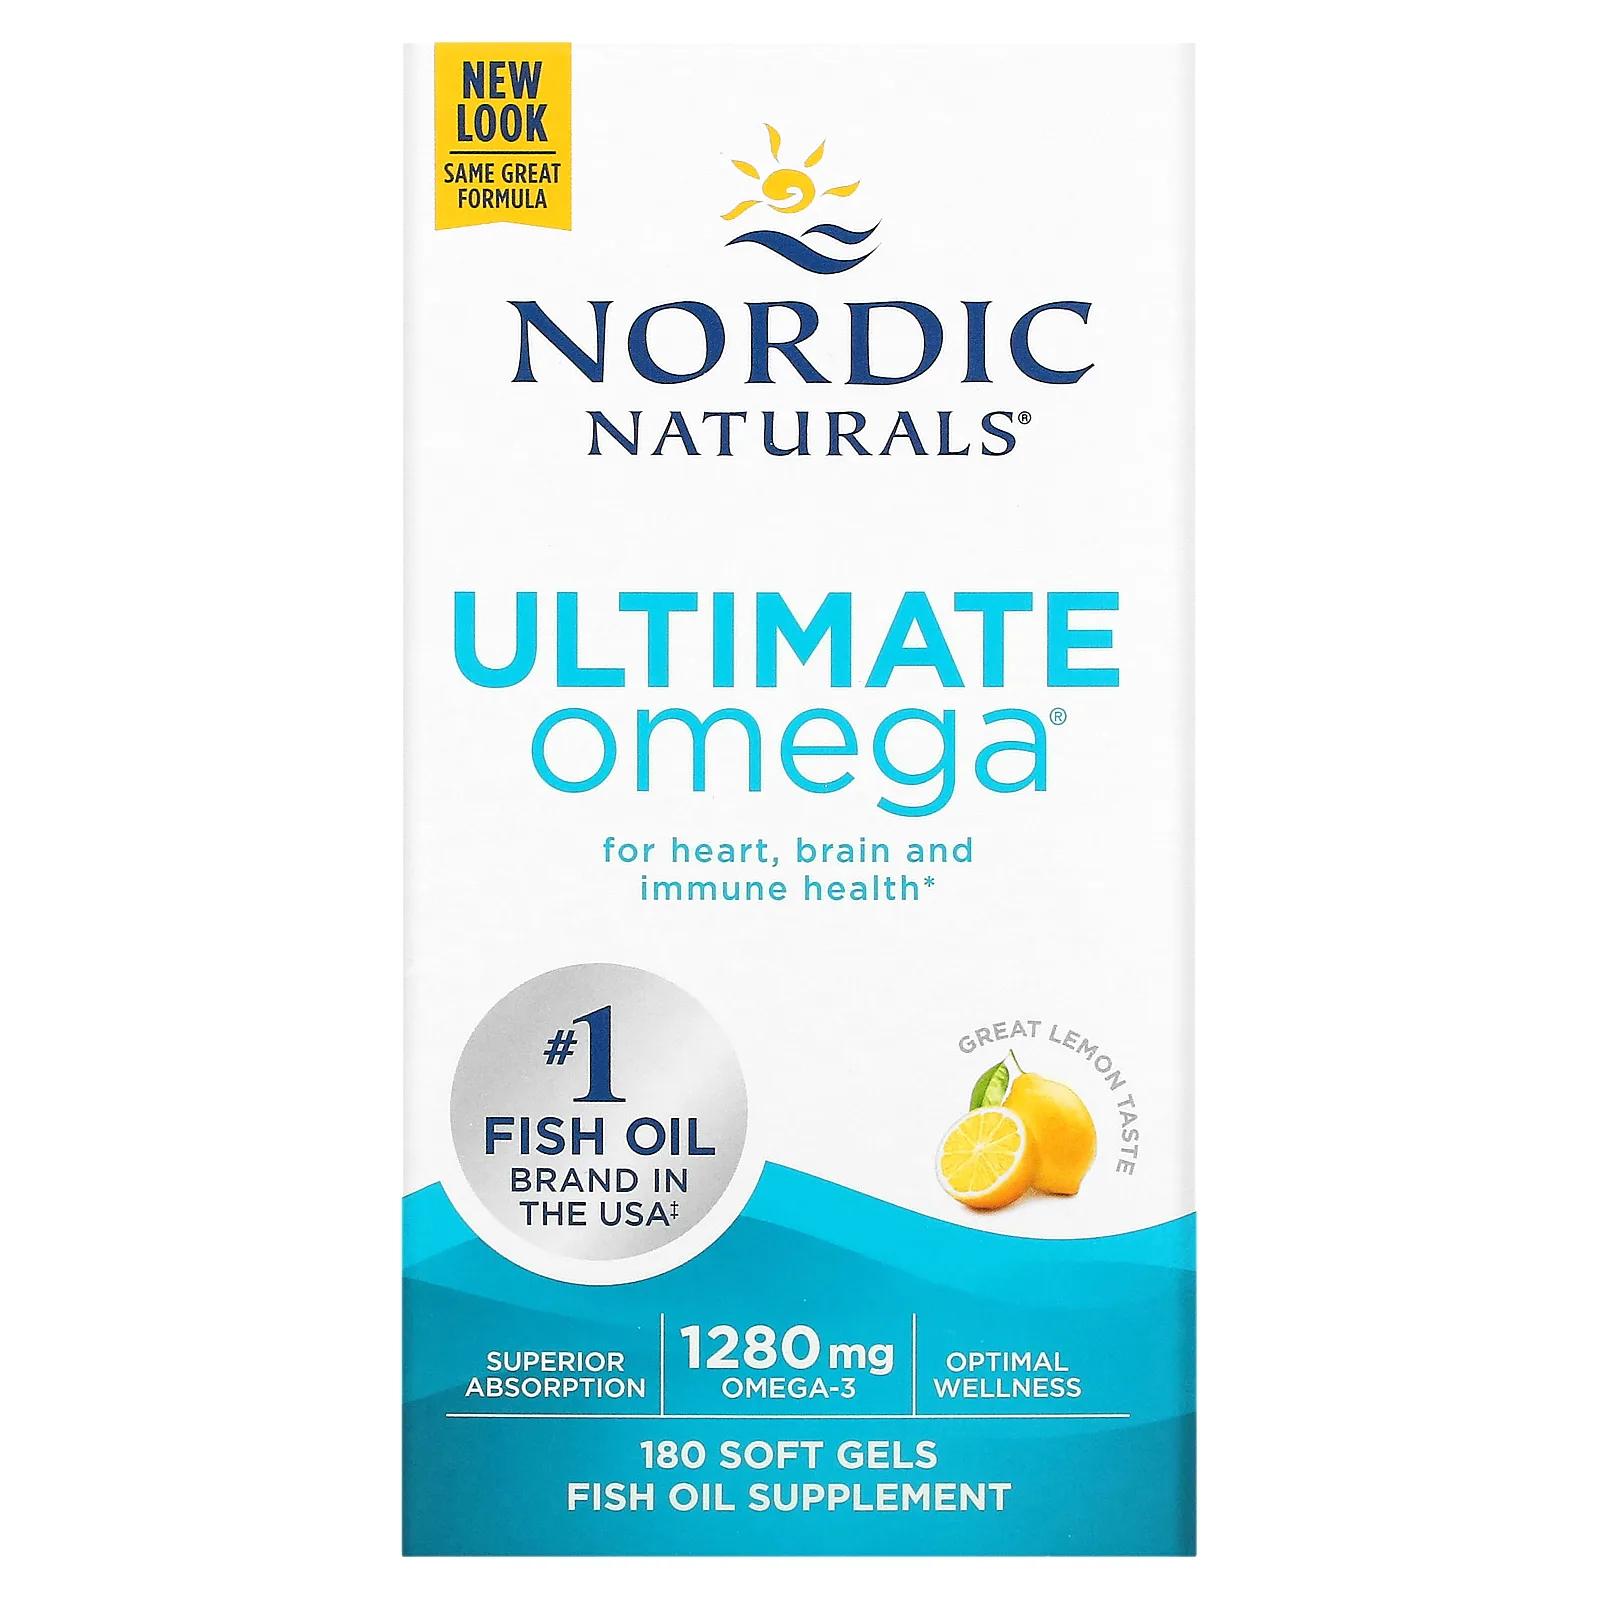 Nordic Naturals Ultimate Omega вкус лимона 1,280 мг 180 мягких капсул nordic naturals ultimate omega со вкусом лимона 640 мг 180 капсул